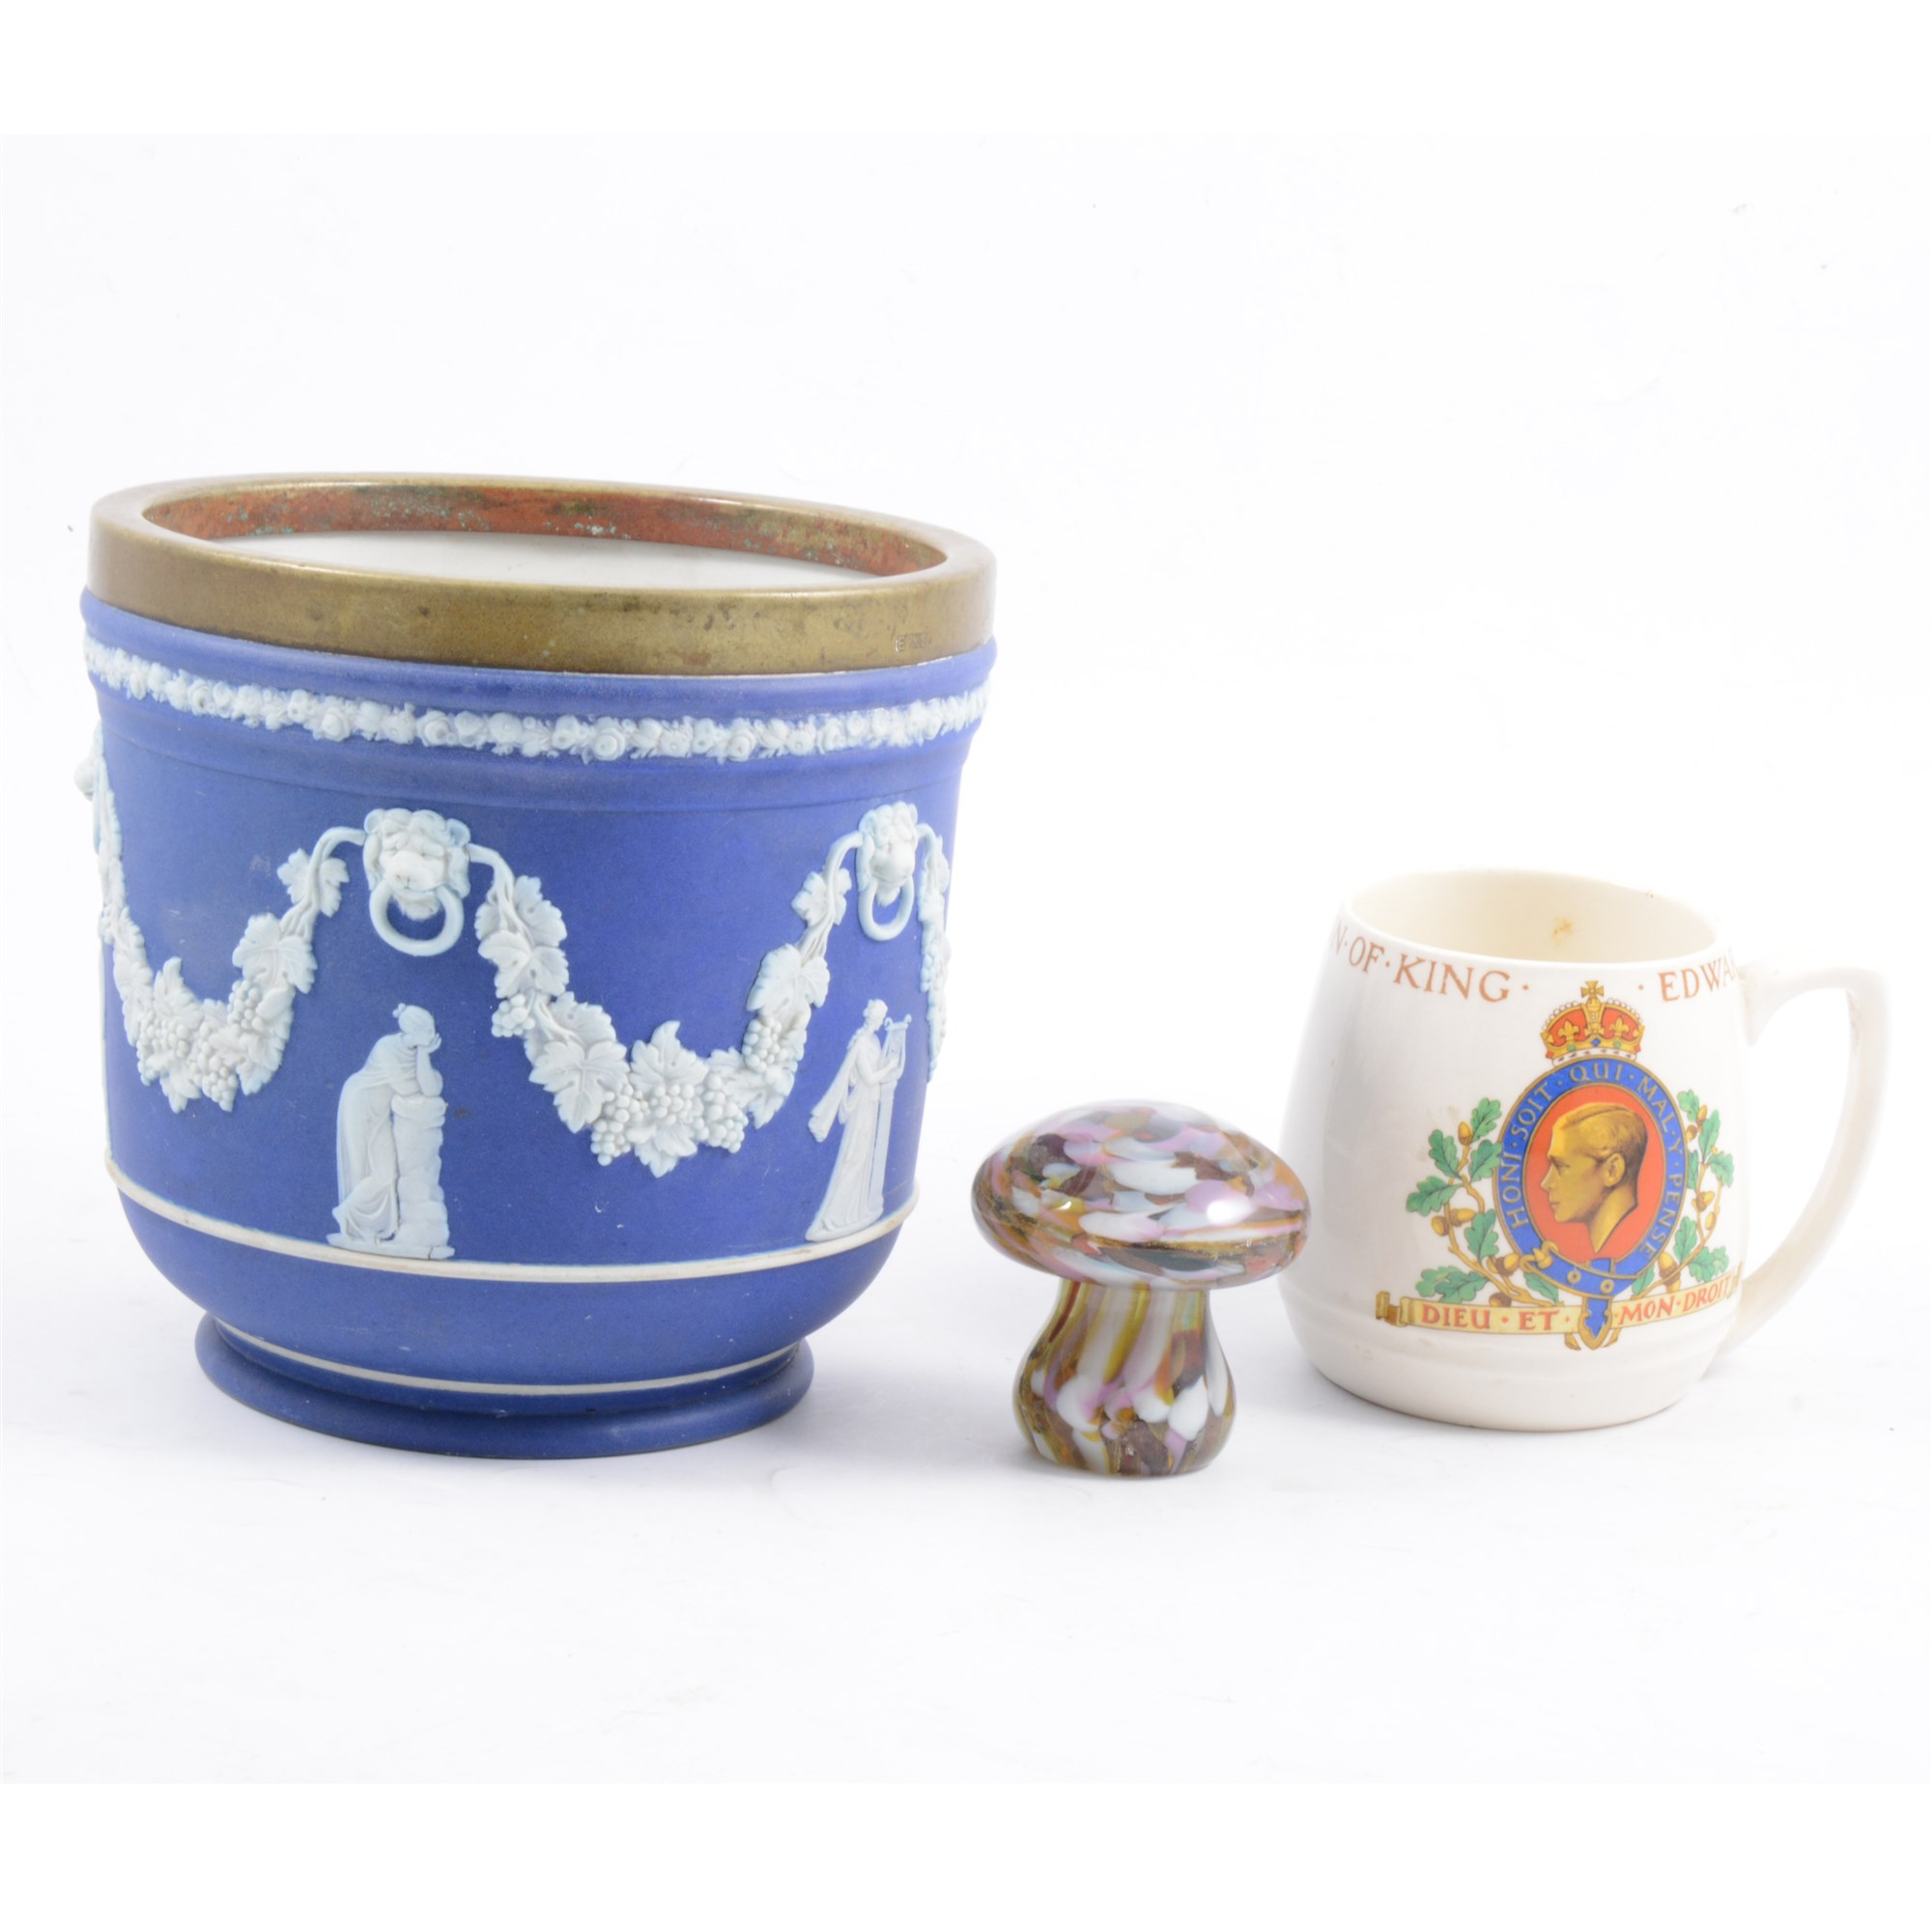 Wedgwood blue jasperware jardinière, other decorative ceramics, and two glass paperweights.